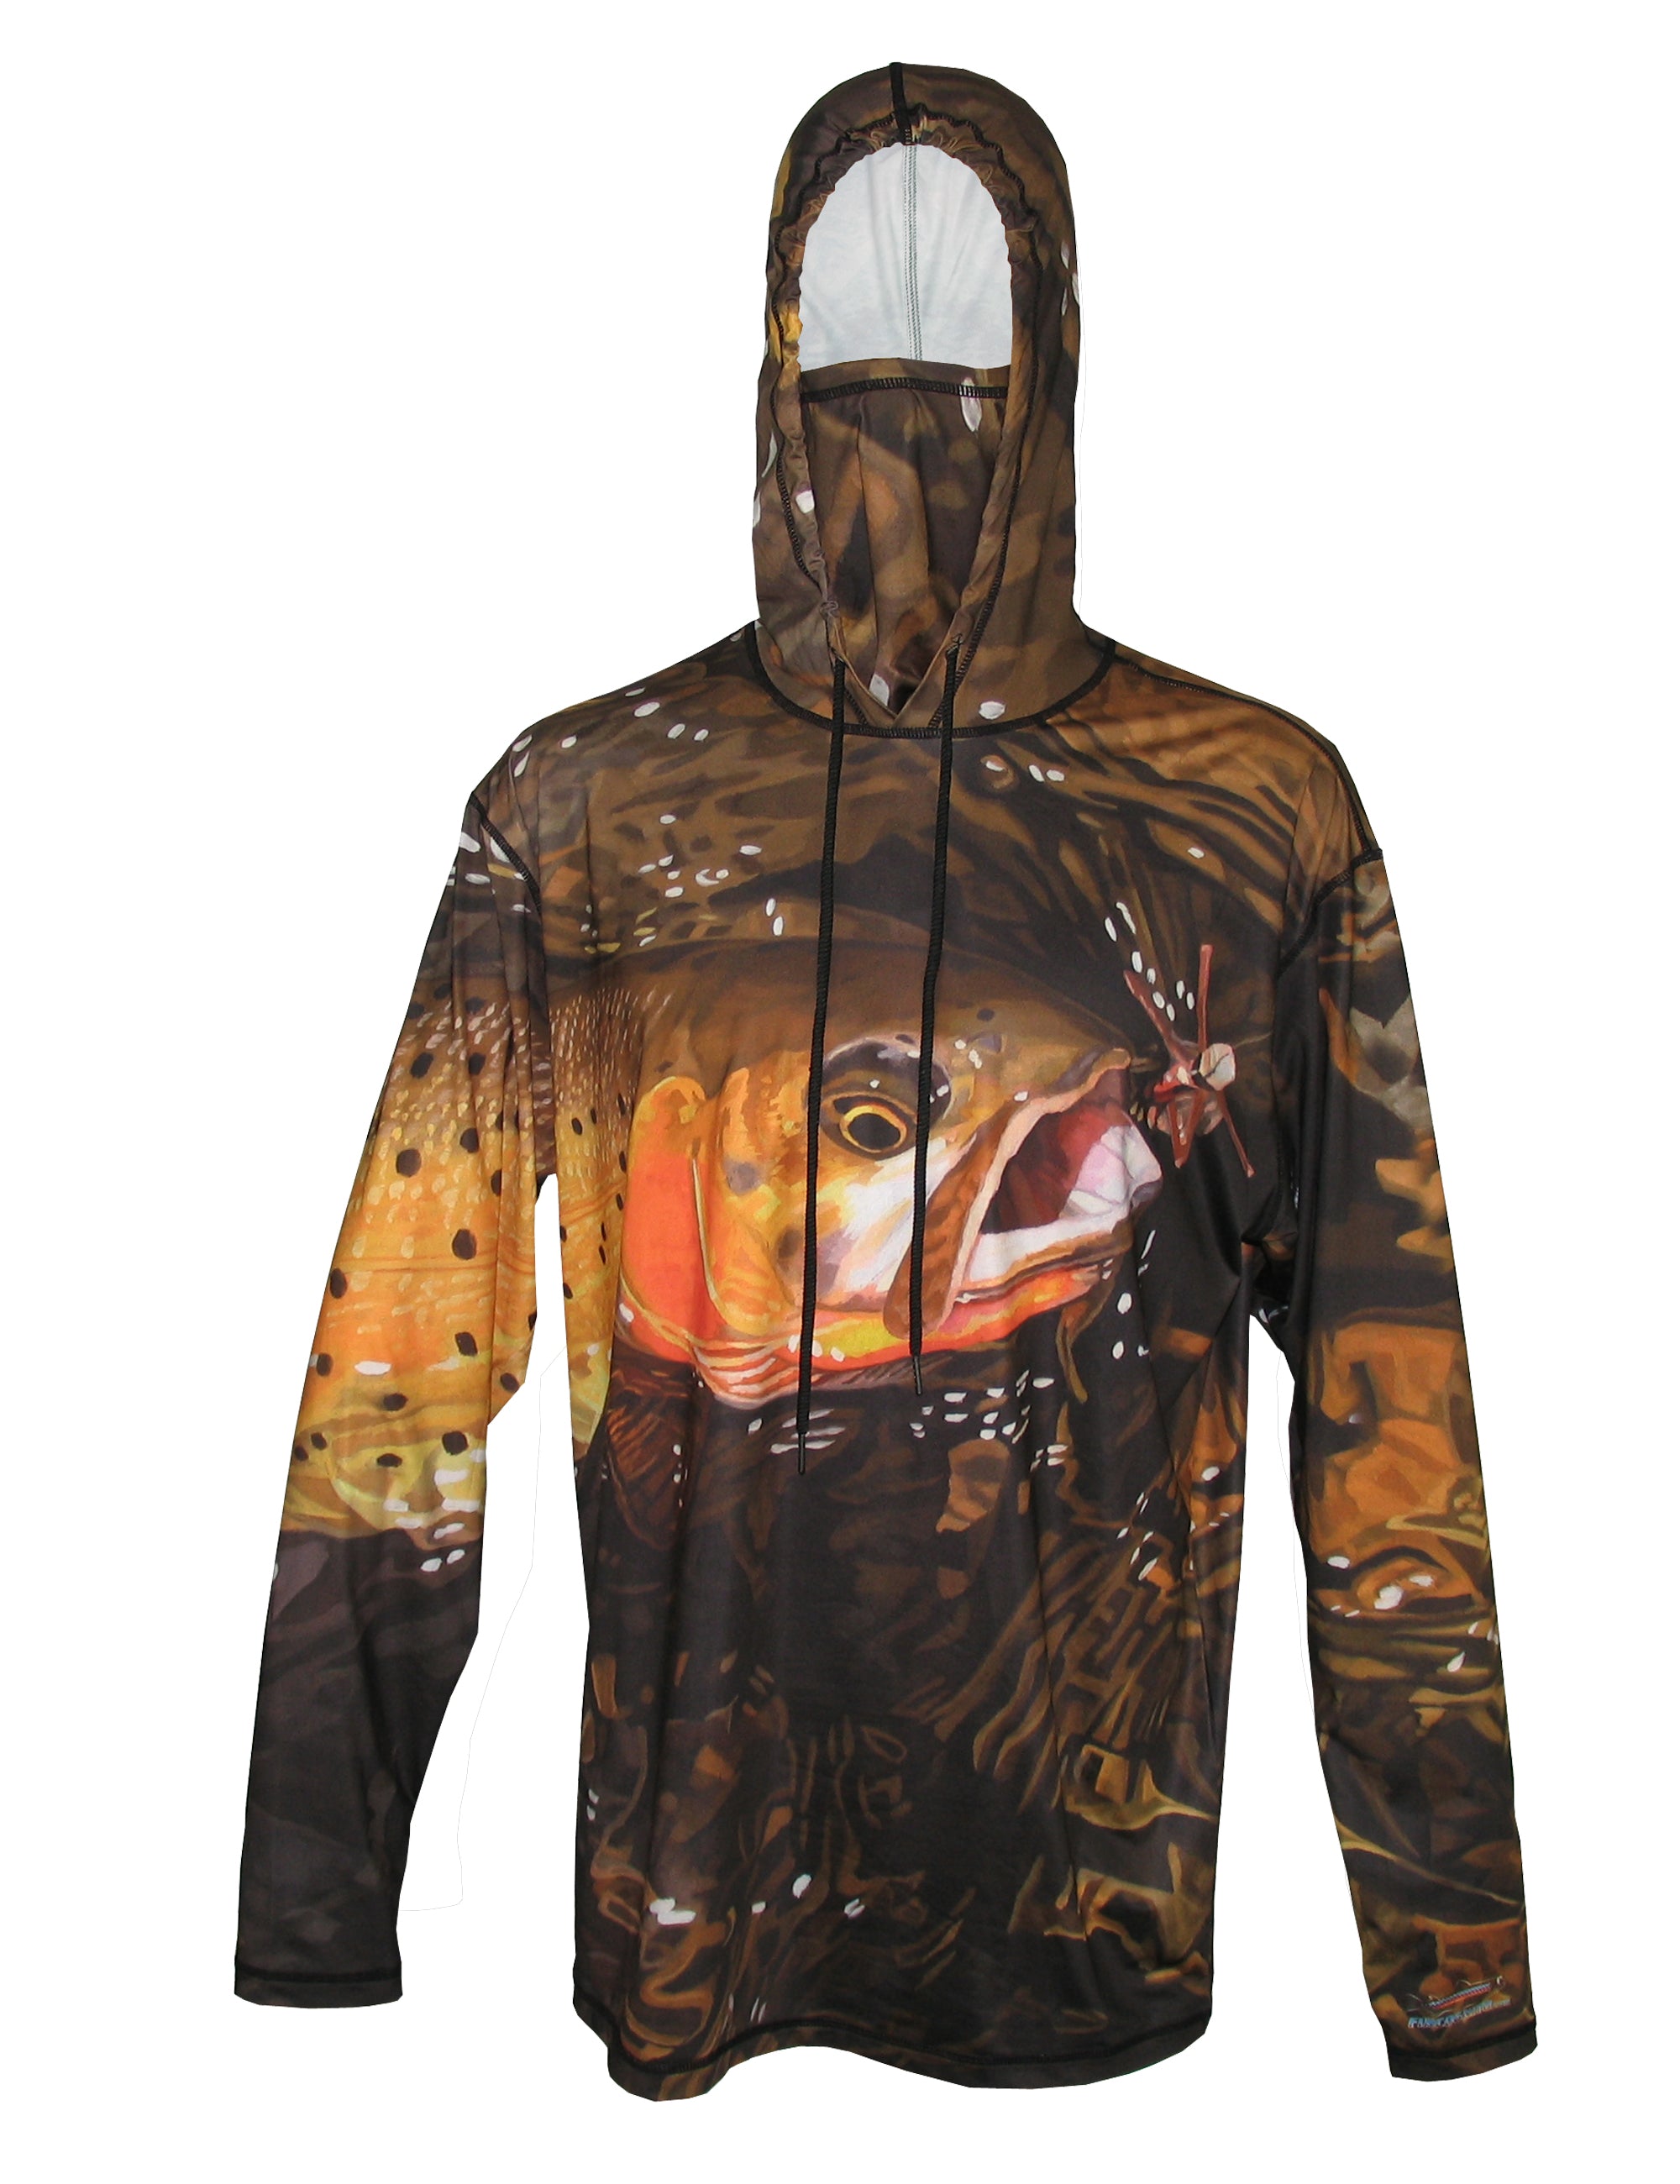 Fincognito Sunpro Hoodie Cutthroat Fish Print Fly Fishing